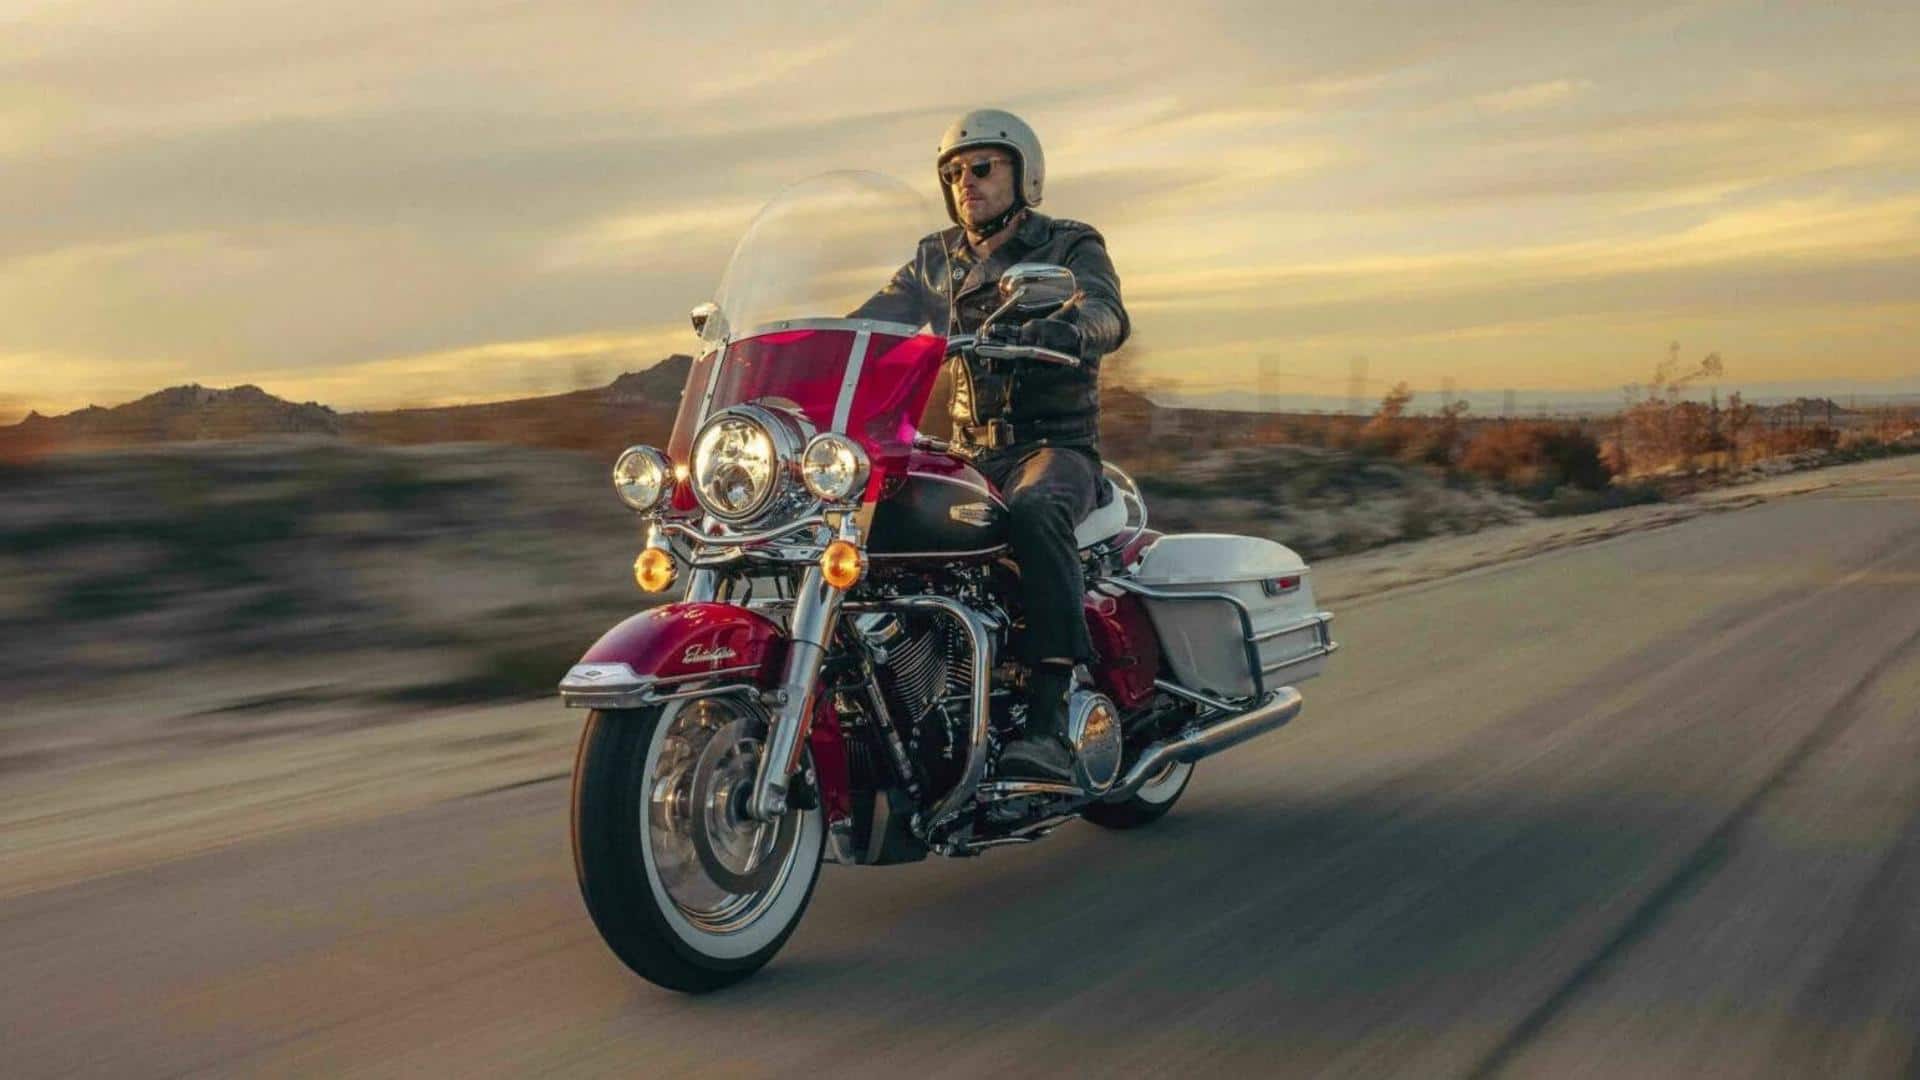 Limited-run Harley-Davidson Electra Glide Highway King unveiled: Check top features